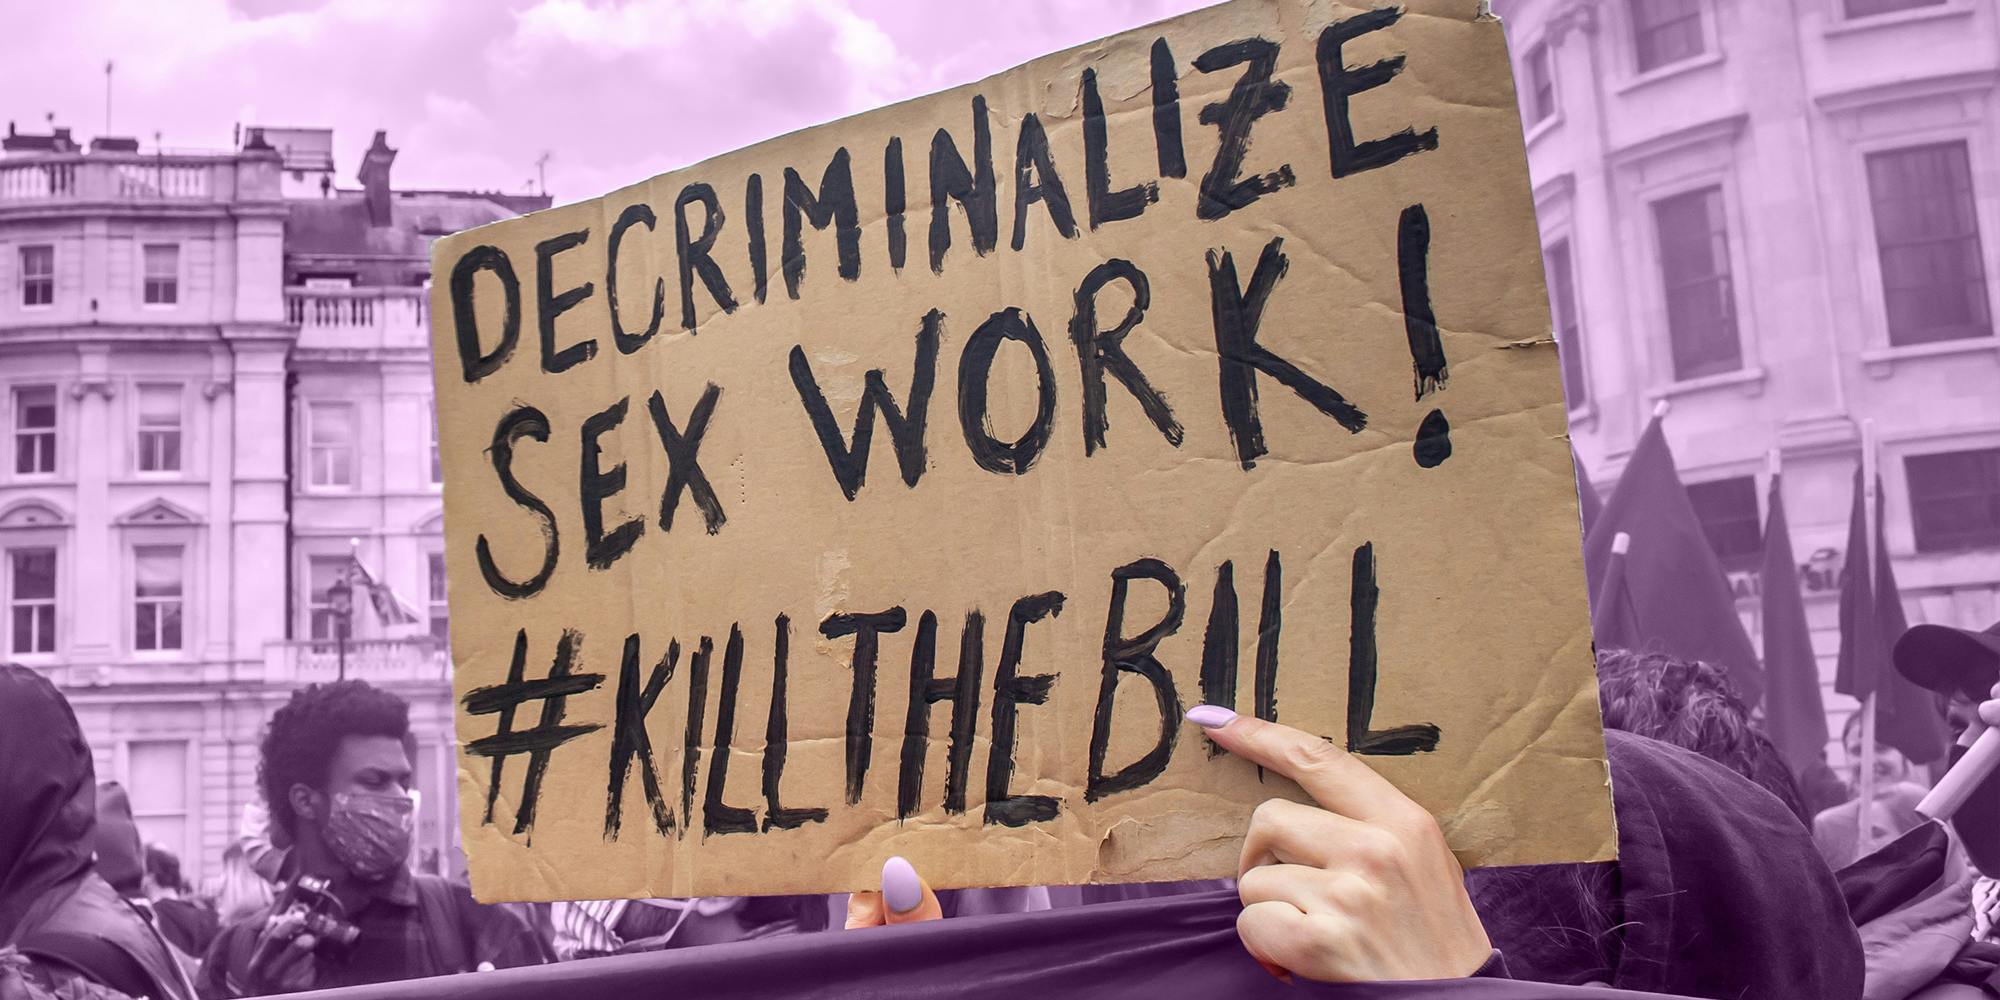 What is the Nordic Model? Sex workers are calling for decriminalization—not legalization